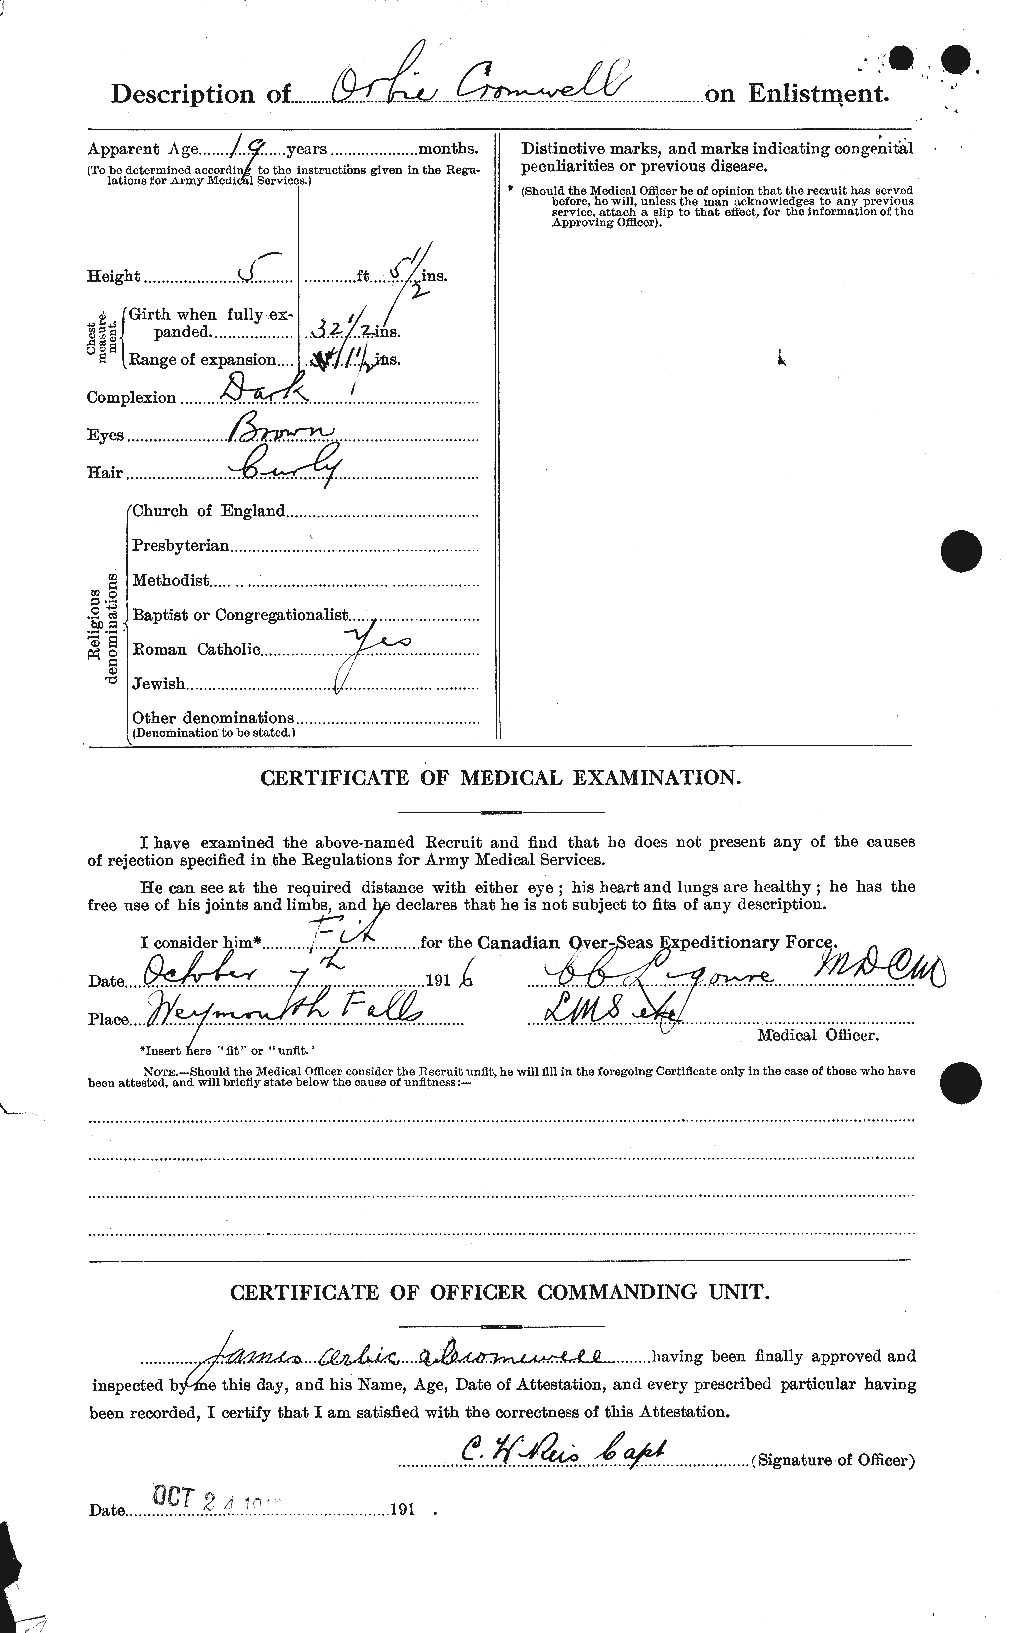 Personnel Records of the First World War - CEF 064925b